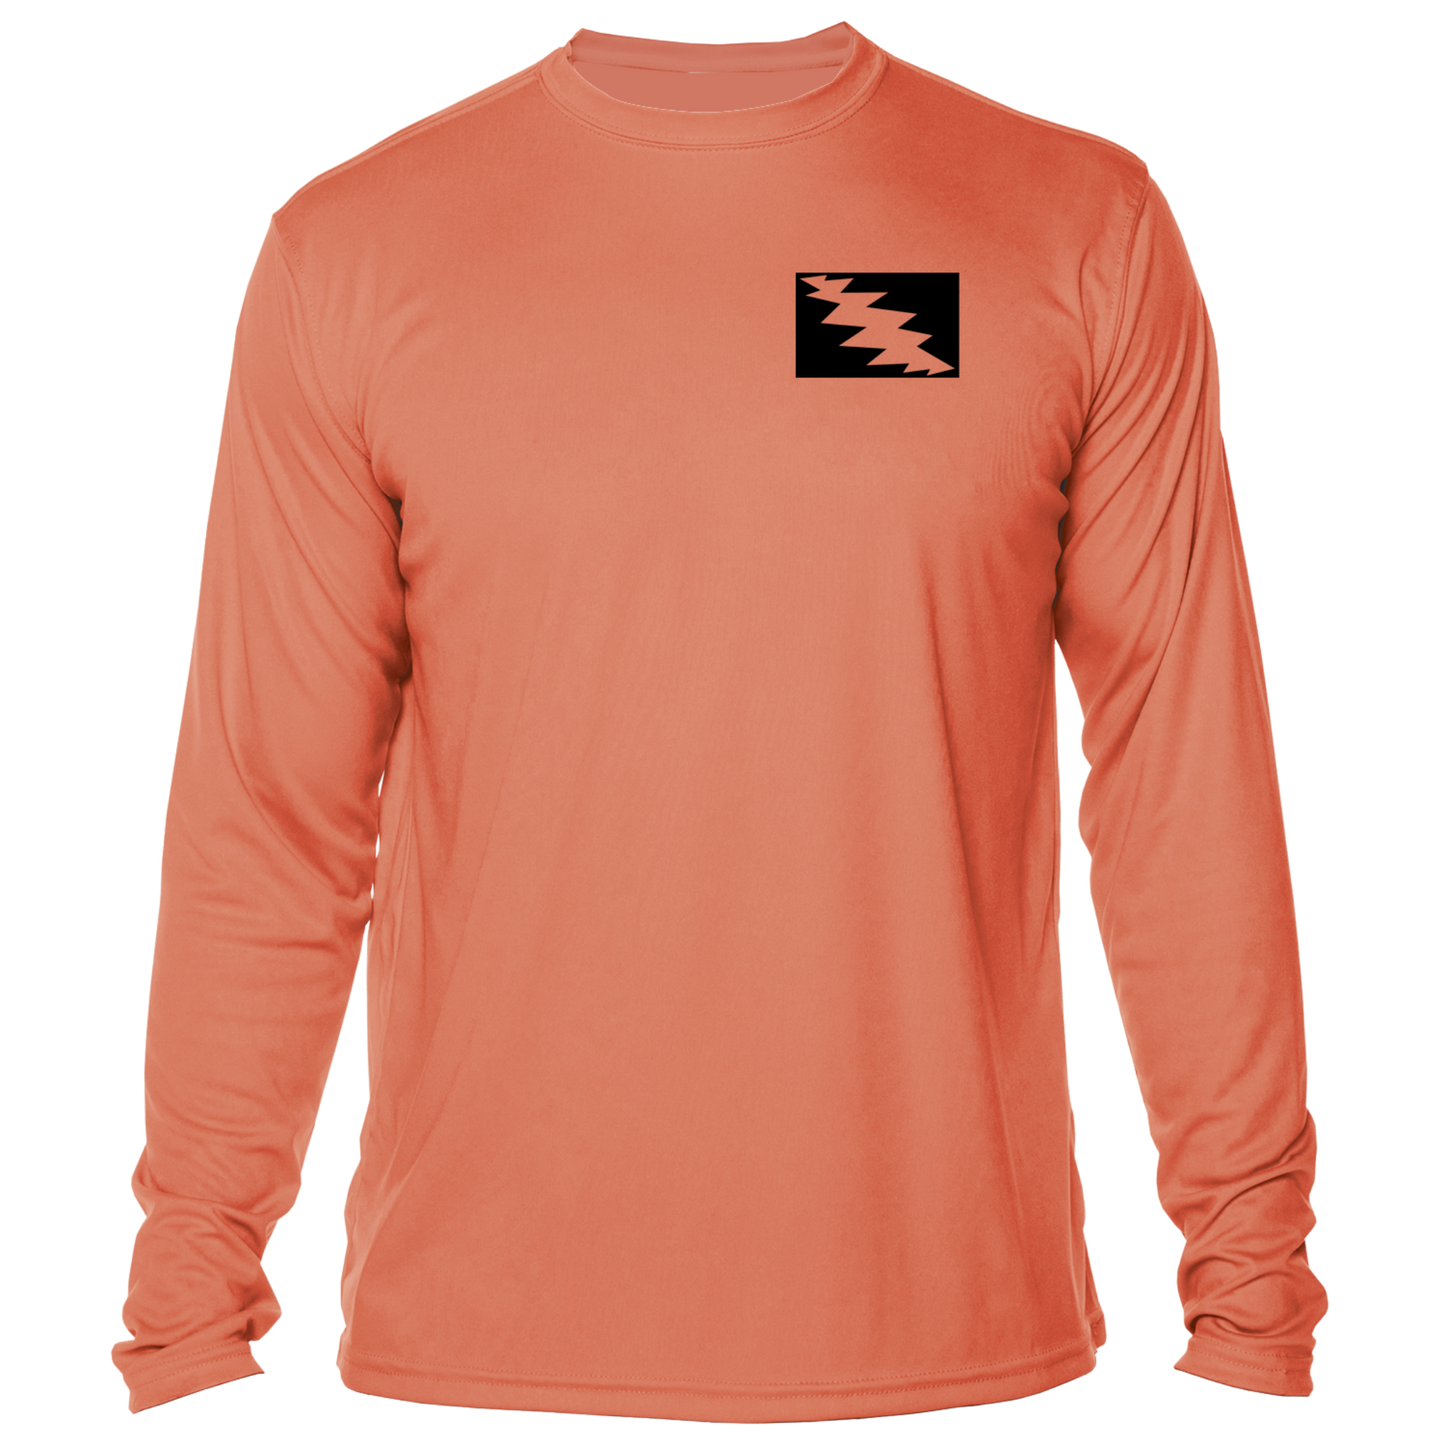 Grateful Diver Palm Tree UV Shirt in salmon showing the front off figure